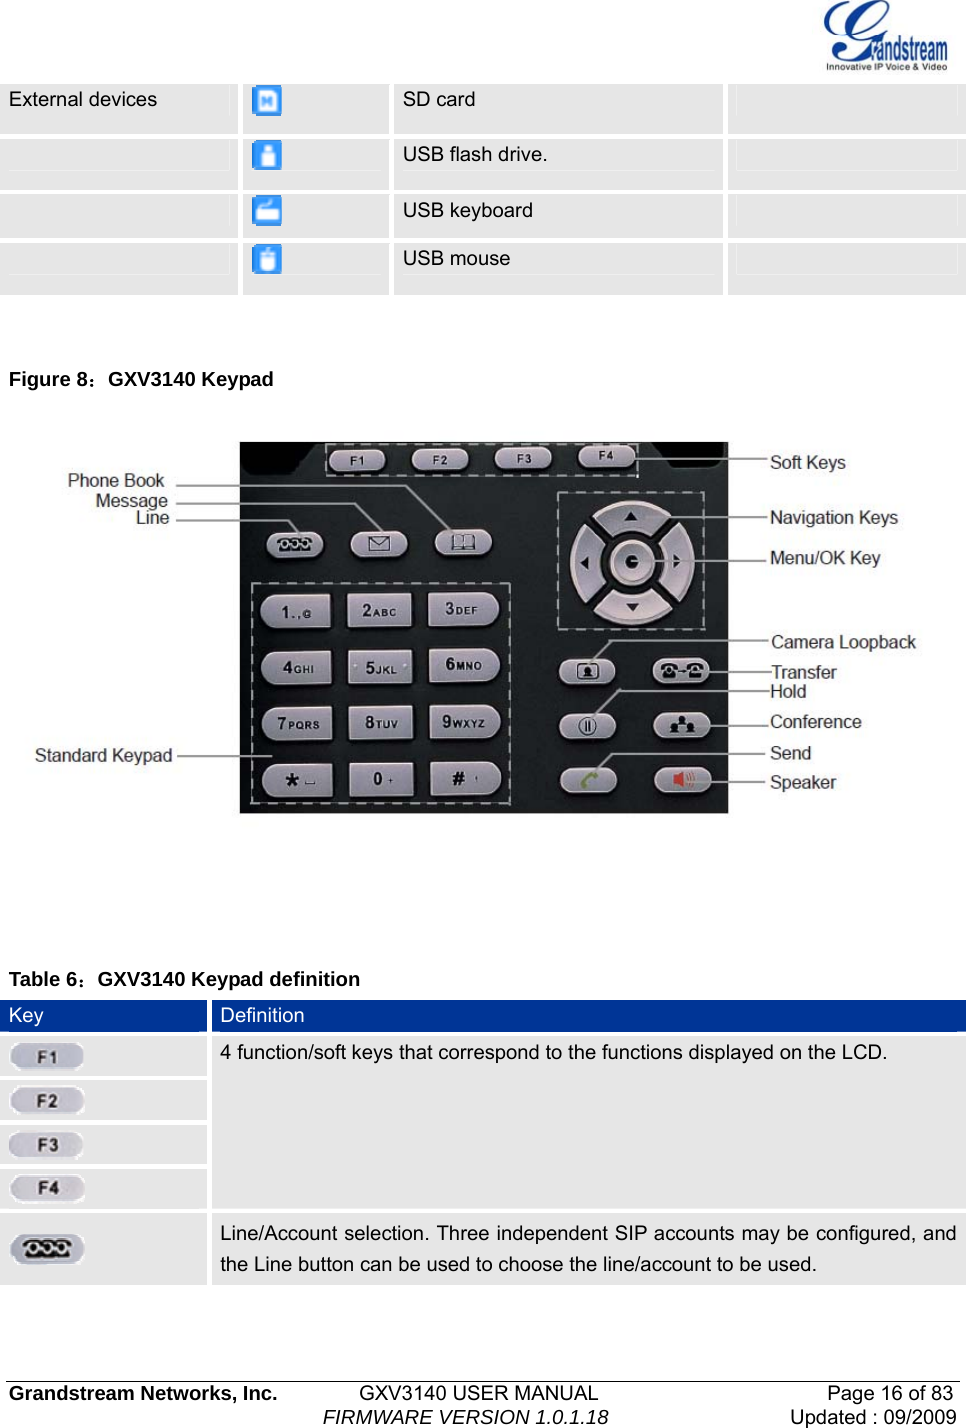   Grandstream Networks, Inc.        GXV3140 USER MANUAL                       Page 16 of 83                                FIRMWARE VERSION 1.0.1.18 Updated : 09/2009  External devices   SD card     USB flash drive.     USB keyboard     USB mouse     Figure 8：GXV3140 Keypad      Table 6：GXV3140 Keypad definition Key  Definition      4 function/soft keys that correspond to the functions displayed on the LCD.   Line/Account selection. Three independent SIP accounts may be configured, and the Line button can be used to choose the line/account to be used. 